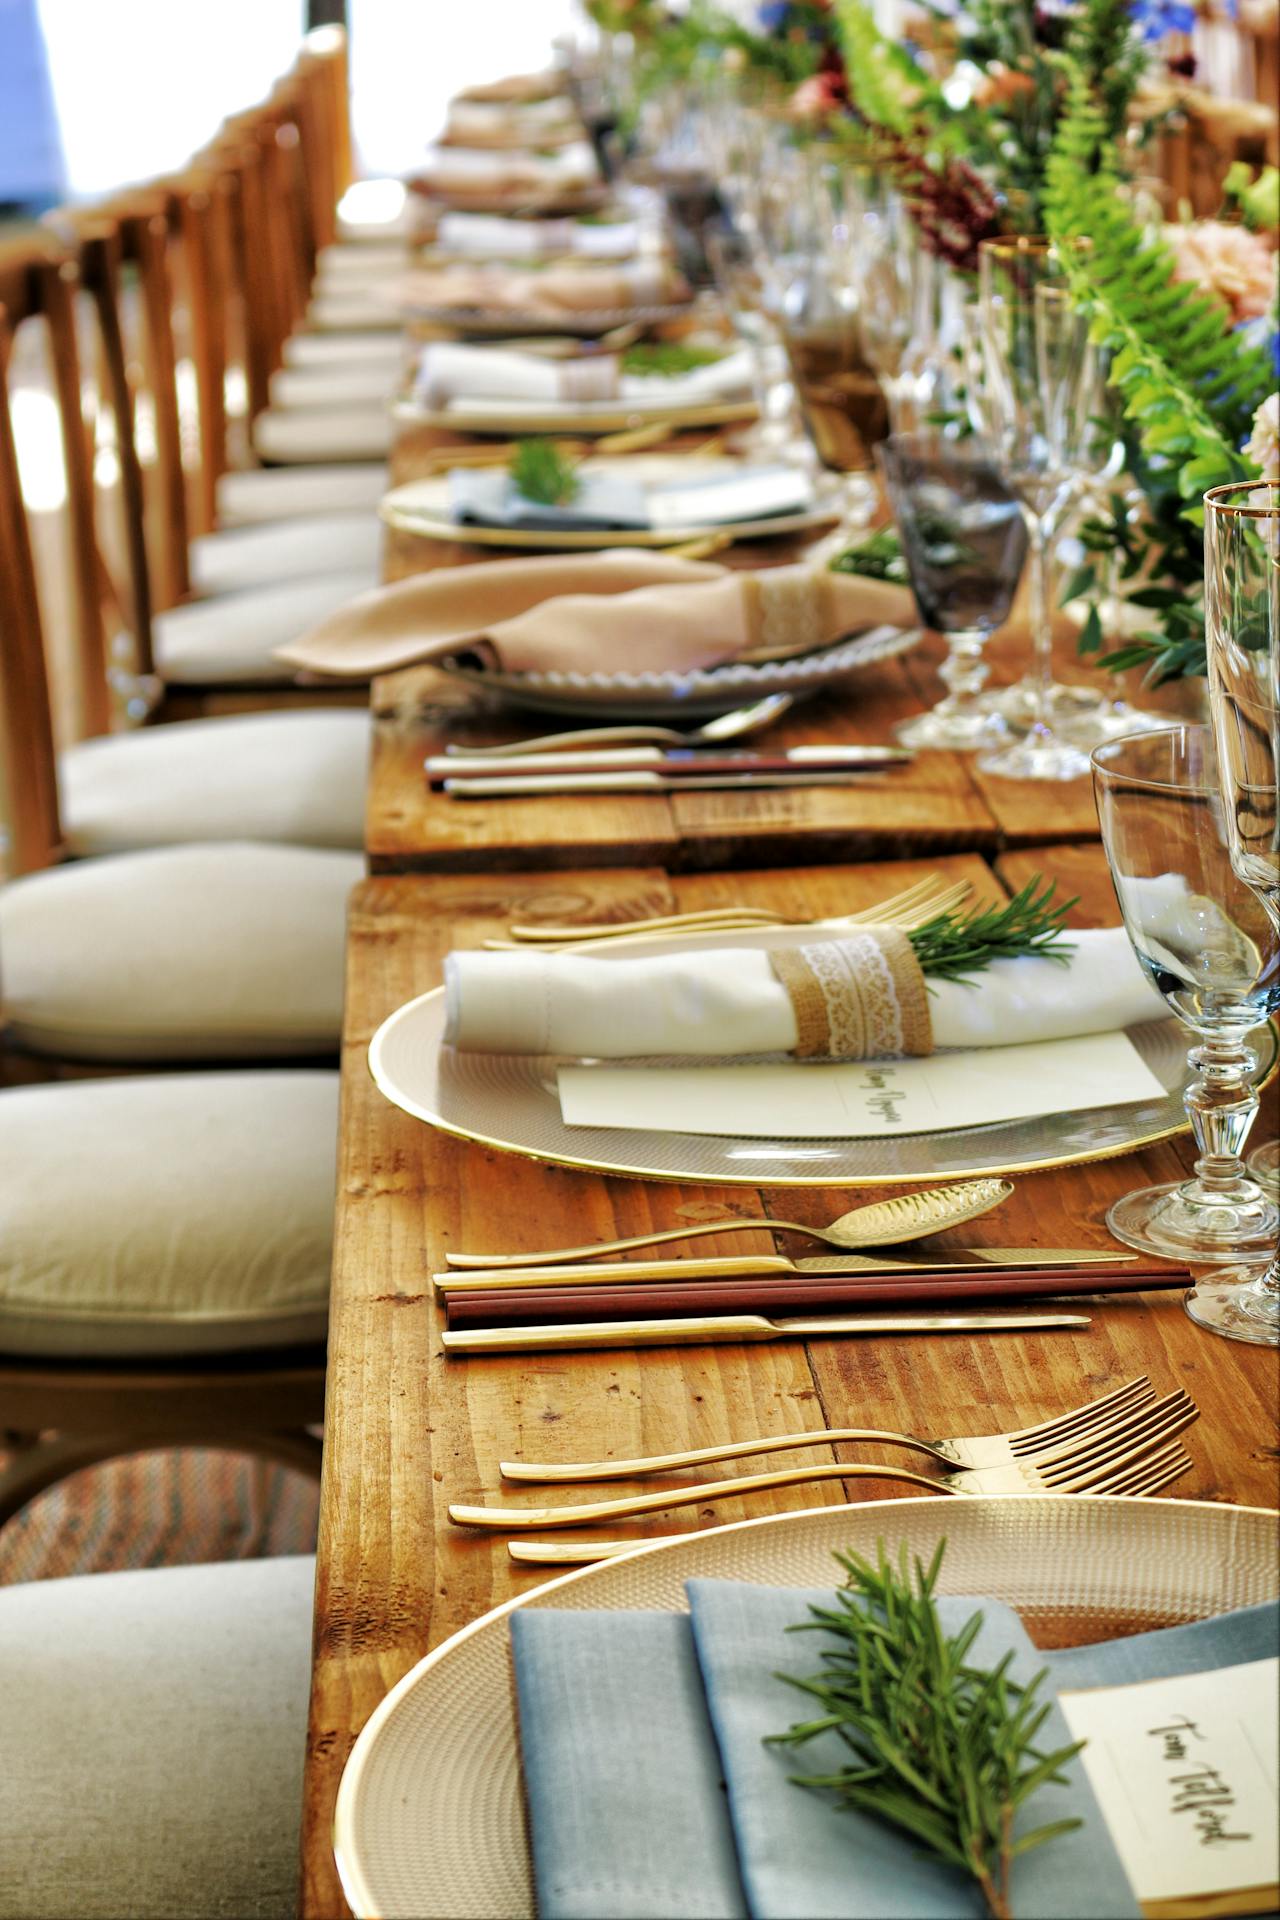 A table setting for a special dinner | Source: Pexels